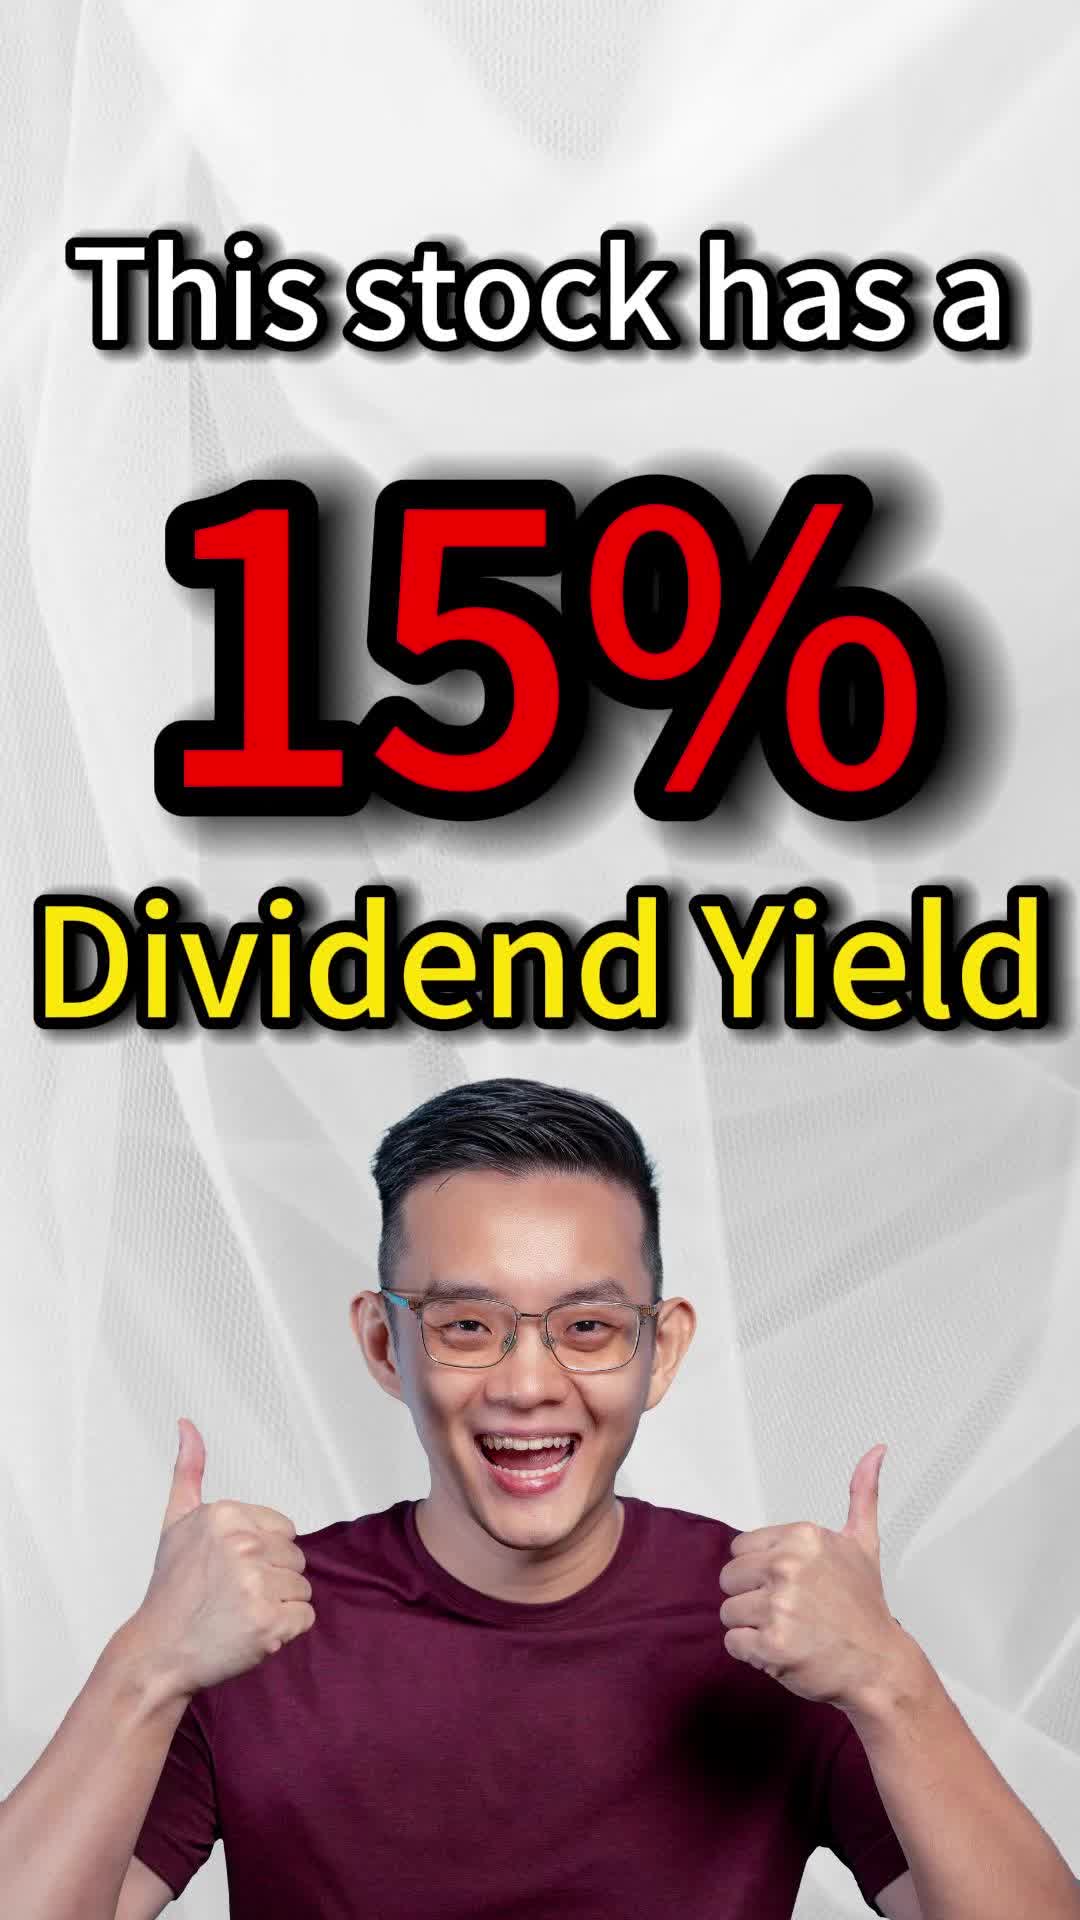 3x EPF’s dividend rate!